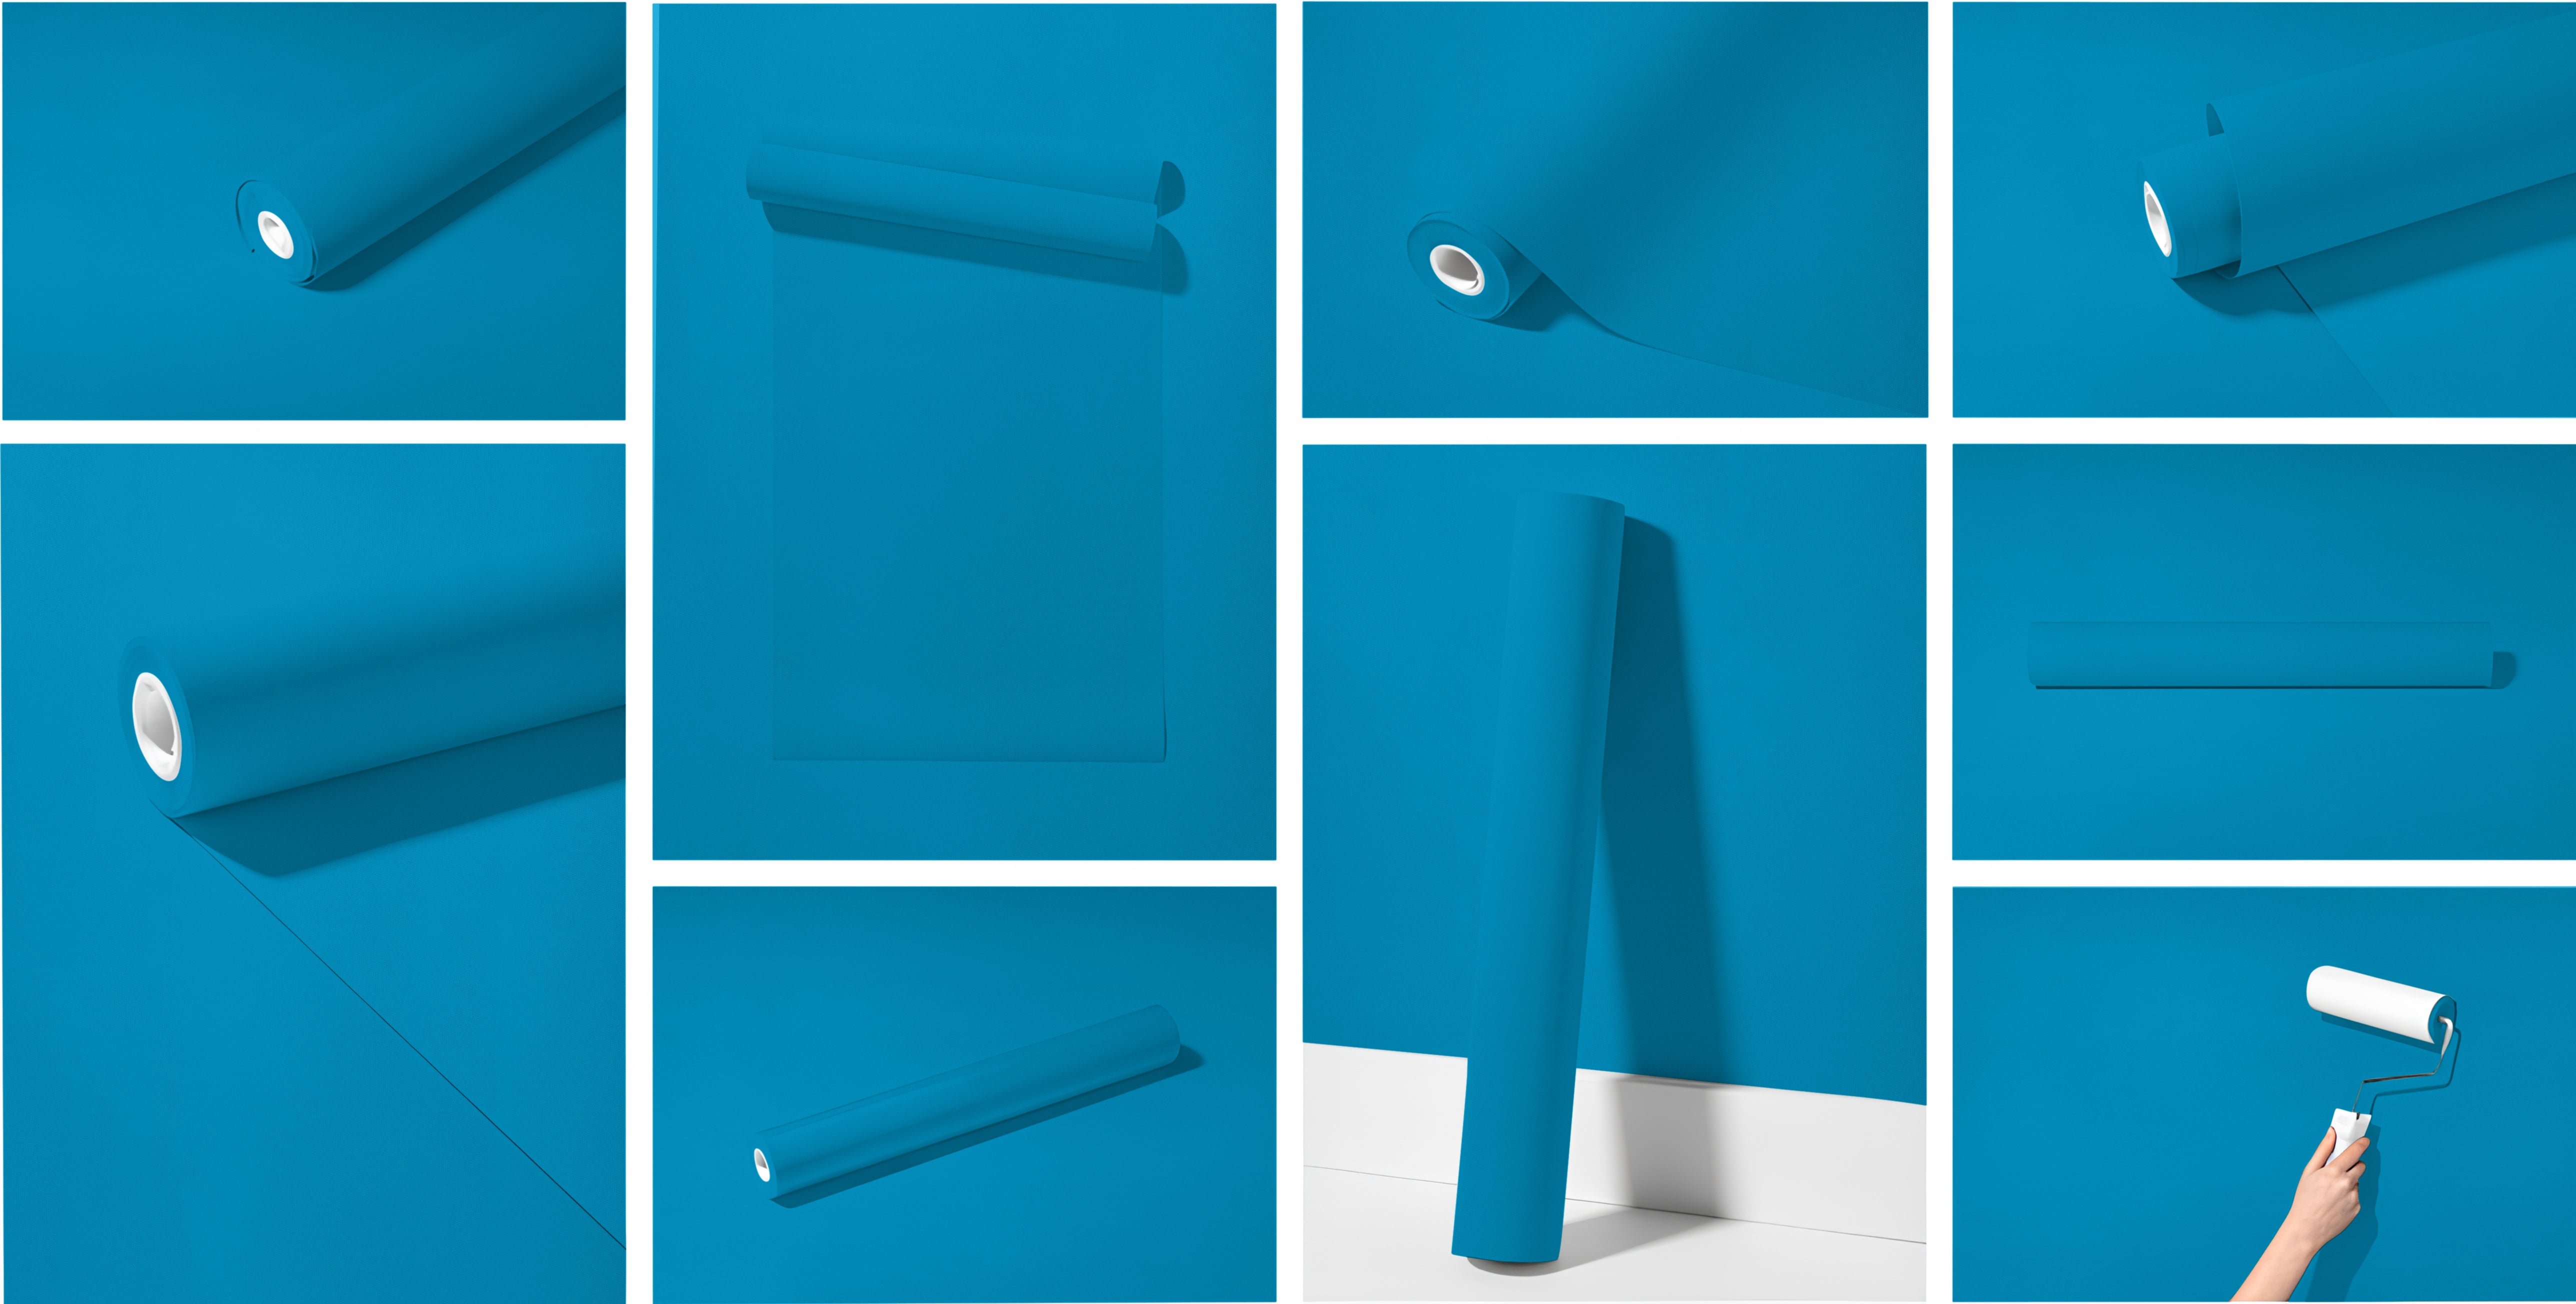 Peel & Stick Removable Re-usable Paint - Color RAL 5012 Light Blue - offRAL™ - RALRAW LLC, USA